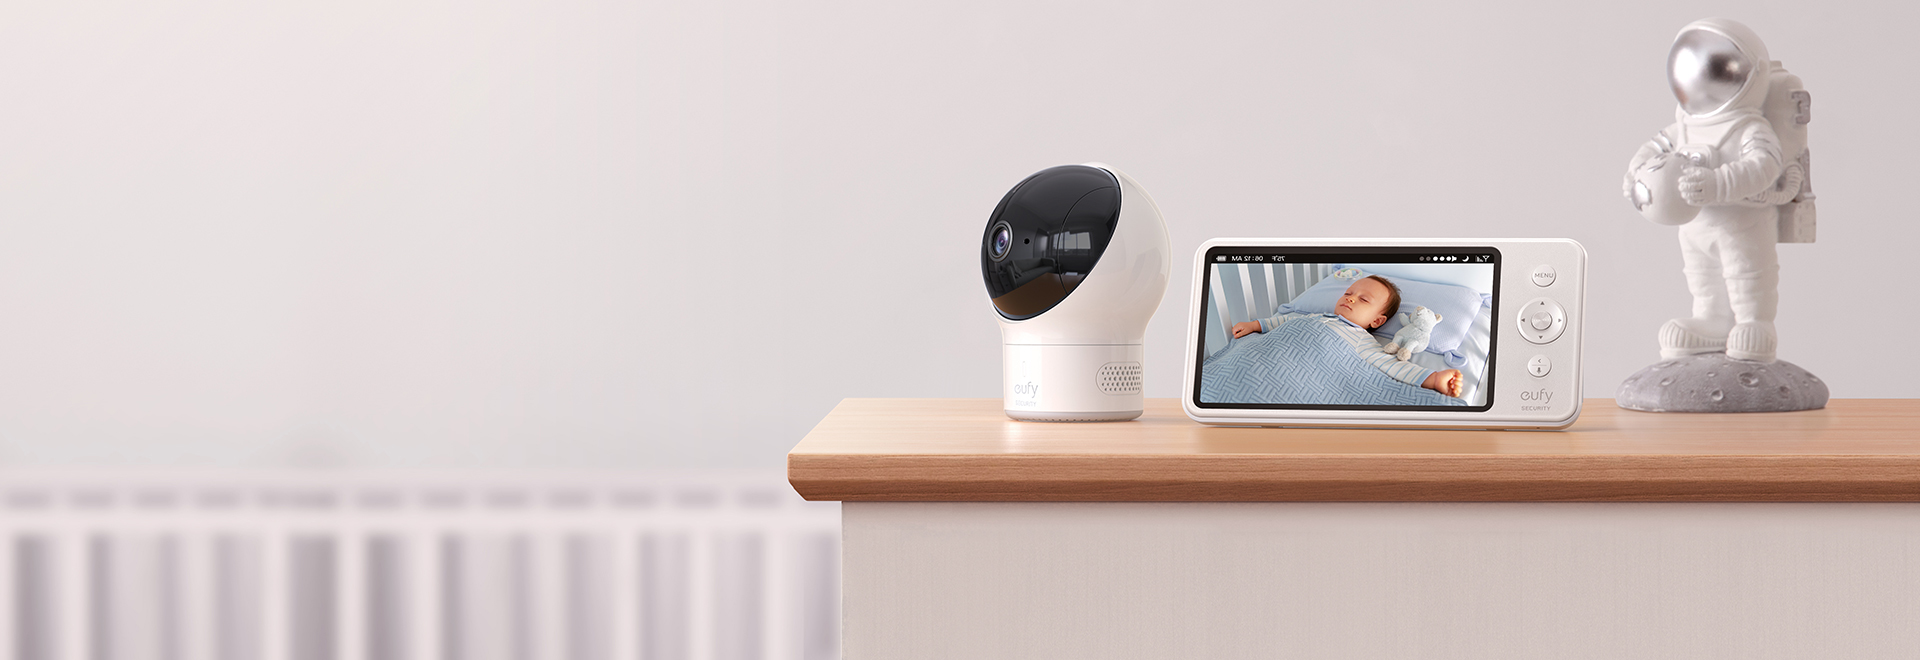 Eufy Spaceview Baby Monitor Review